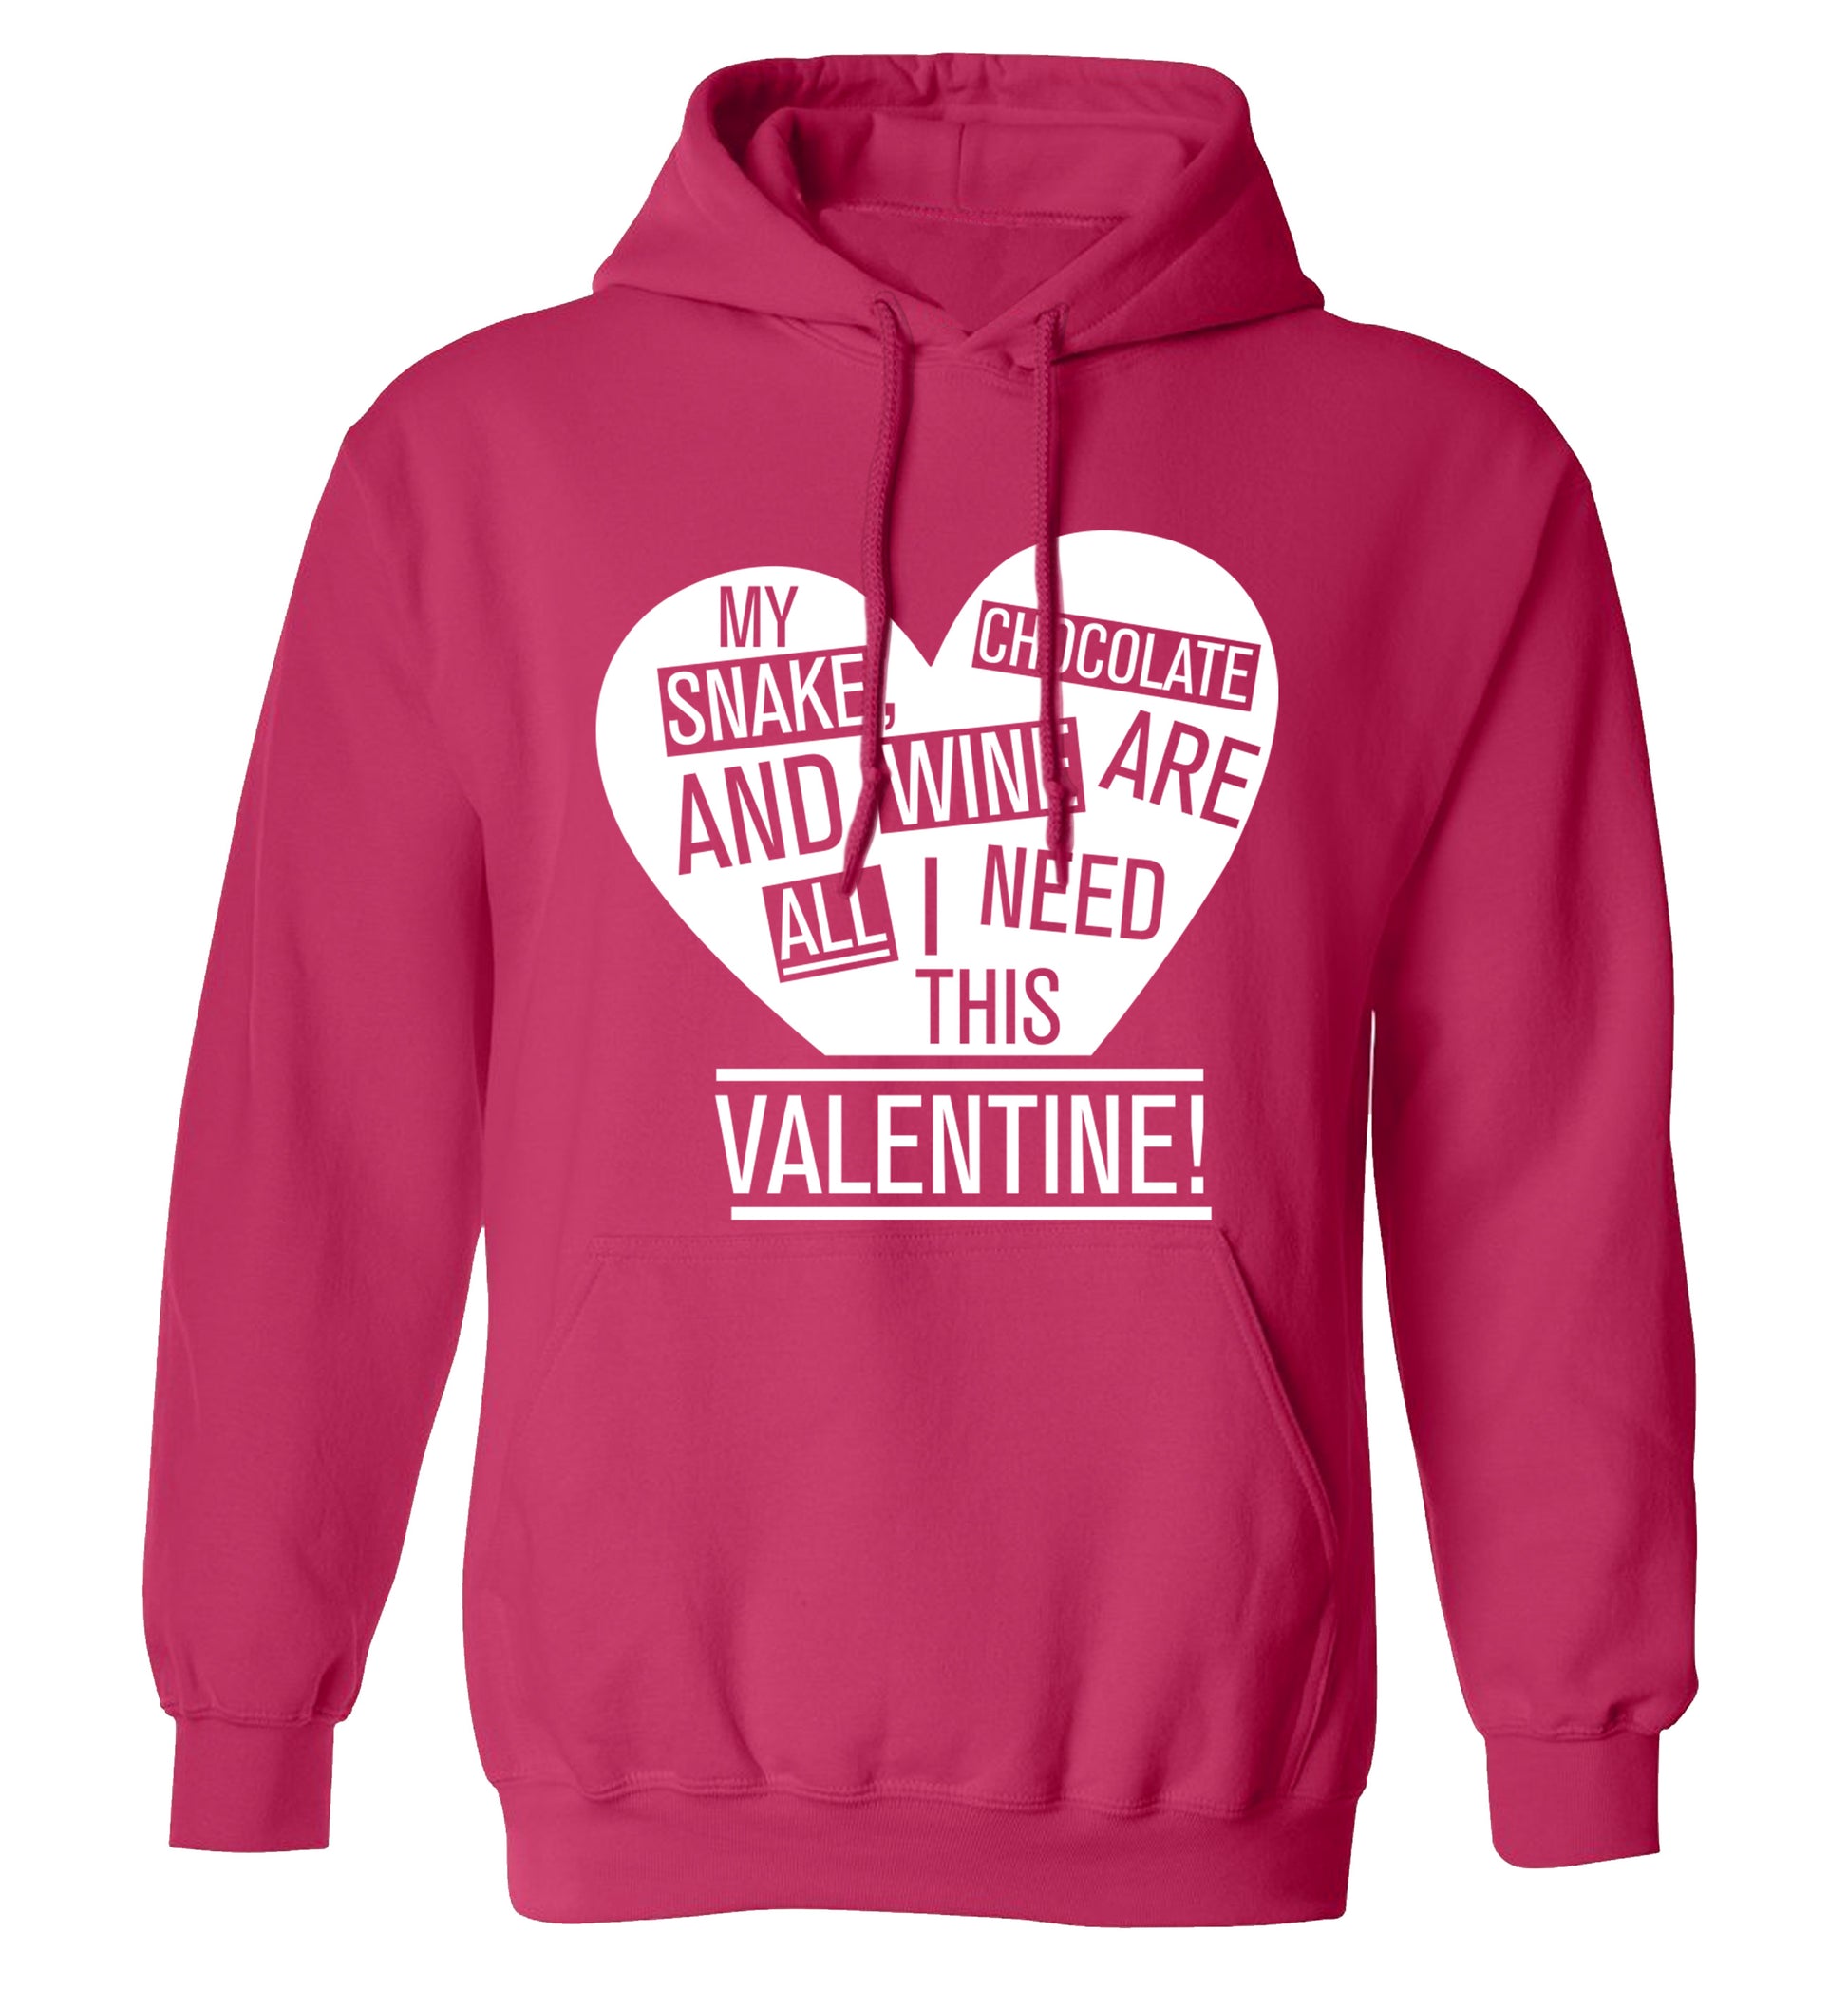 My snake, chocolate and wine are all I need this valentine! adults unisex pink hoodie 2XL